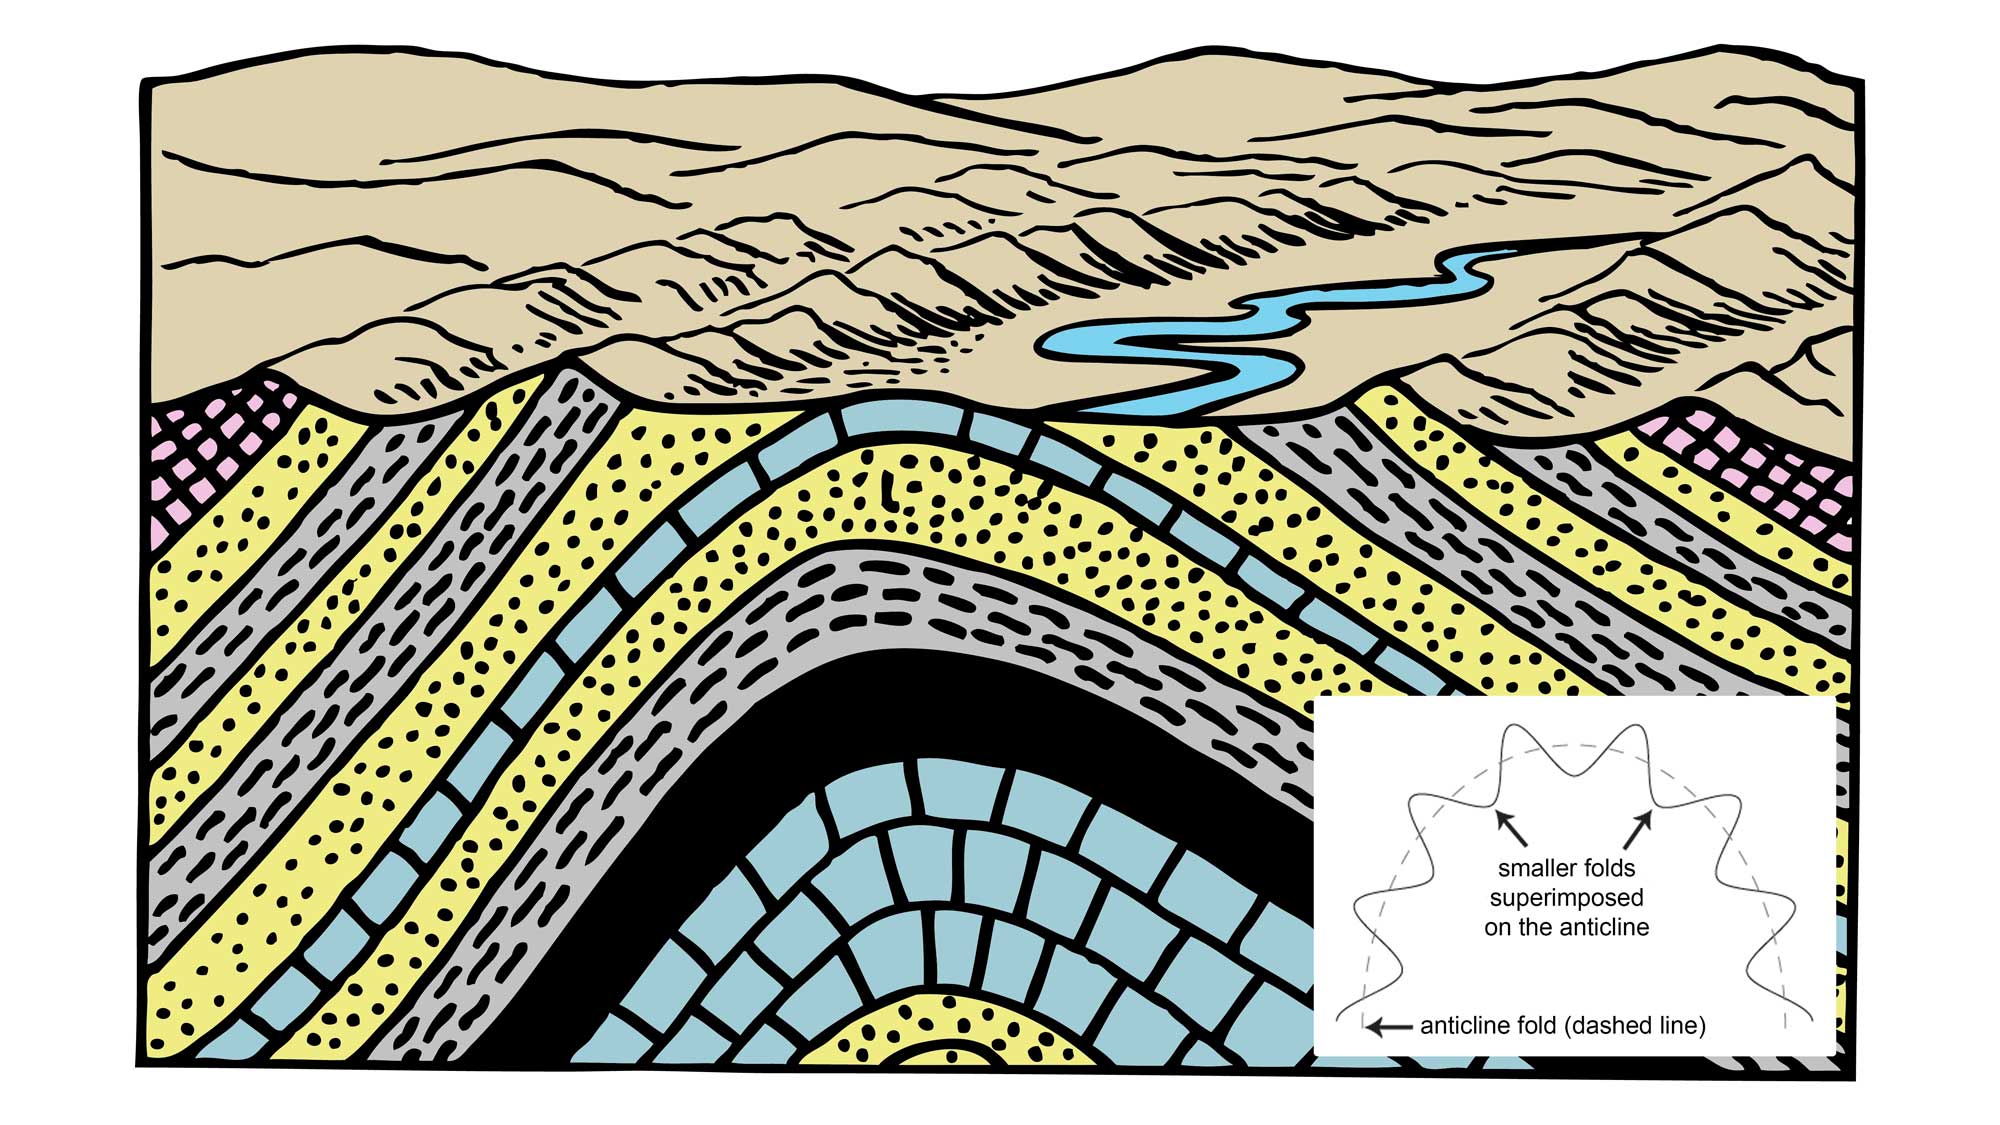 Drawing showing a cross-section of an anticline, with an inset image showing the structure of an anticlinorium.